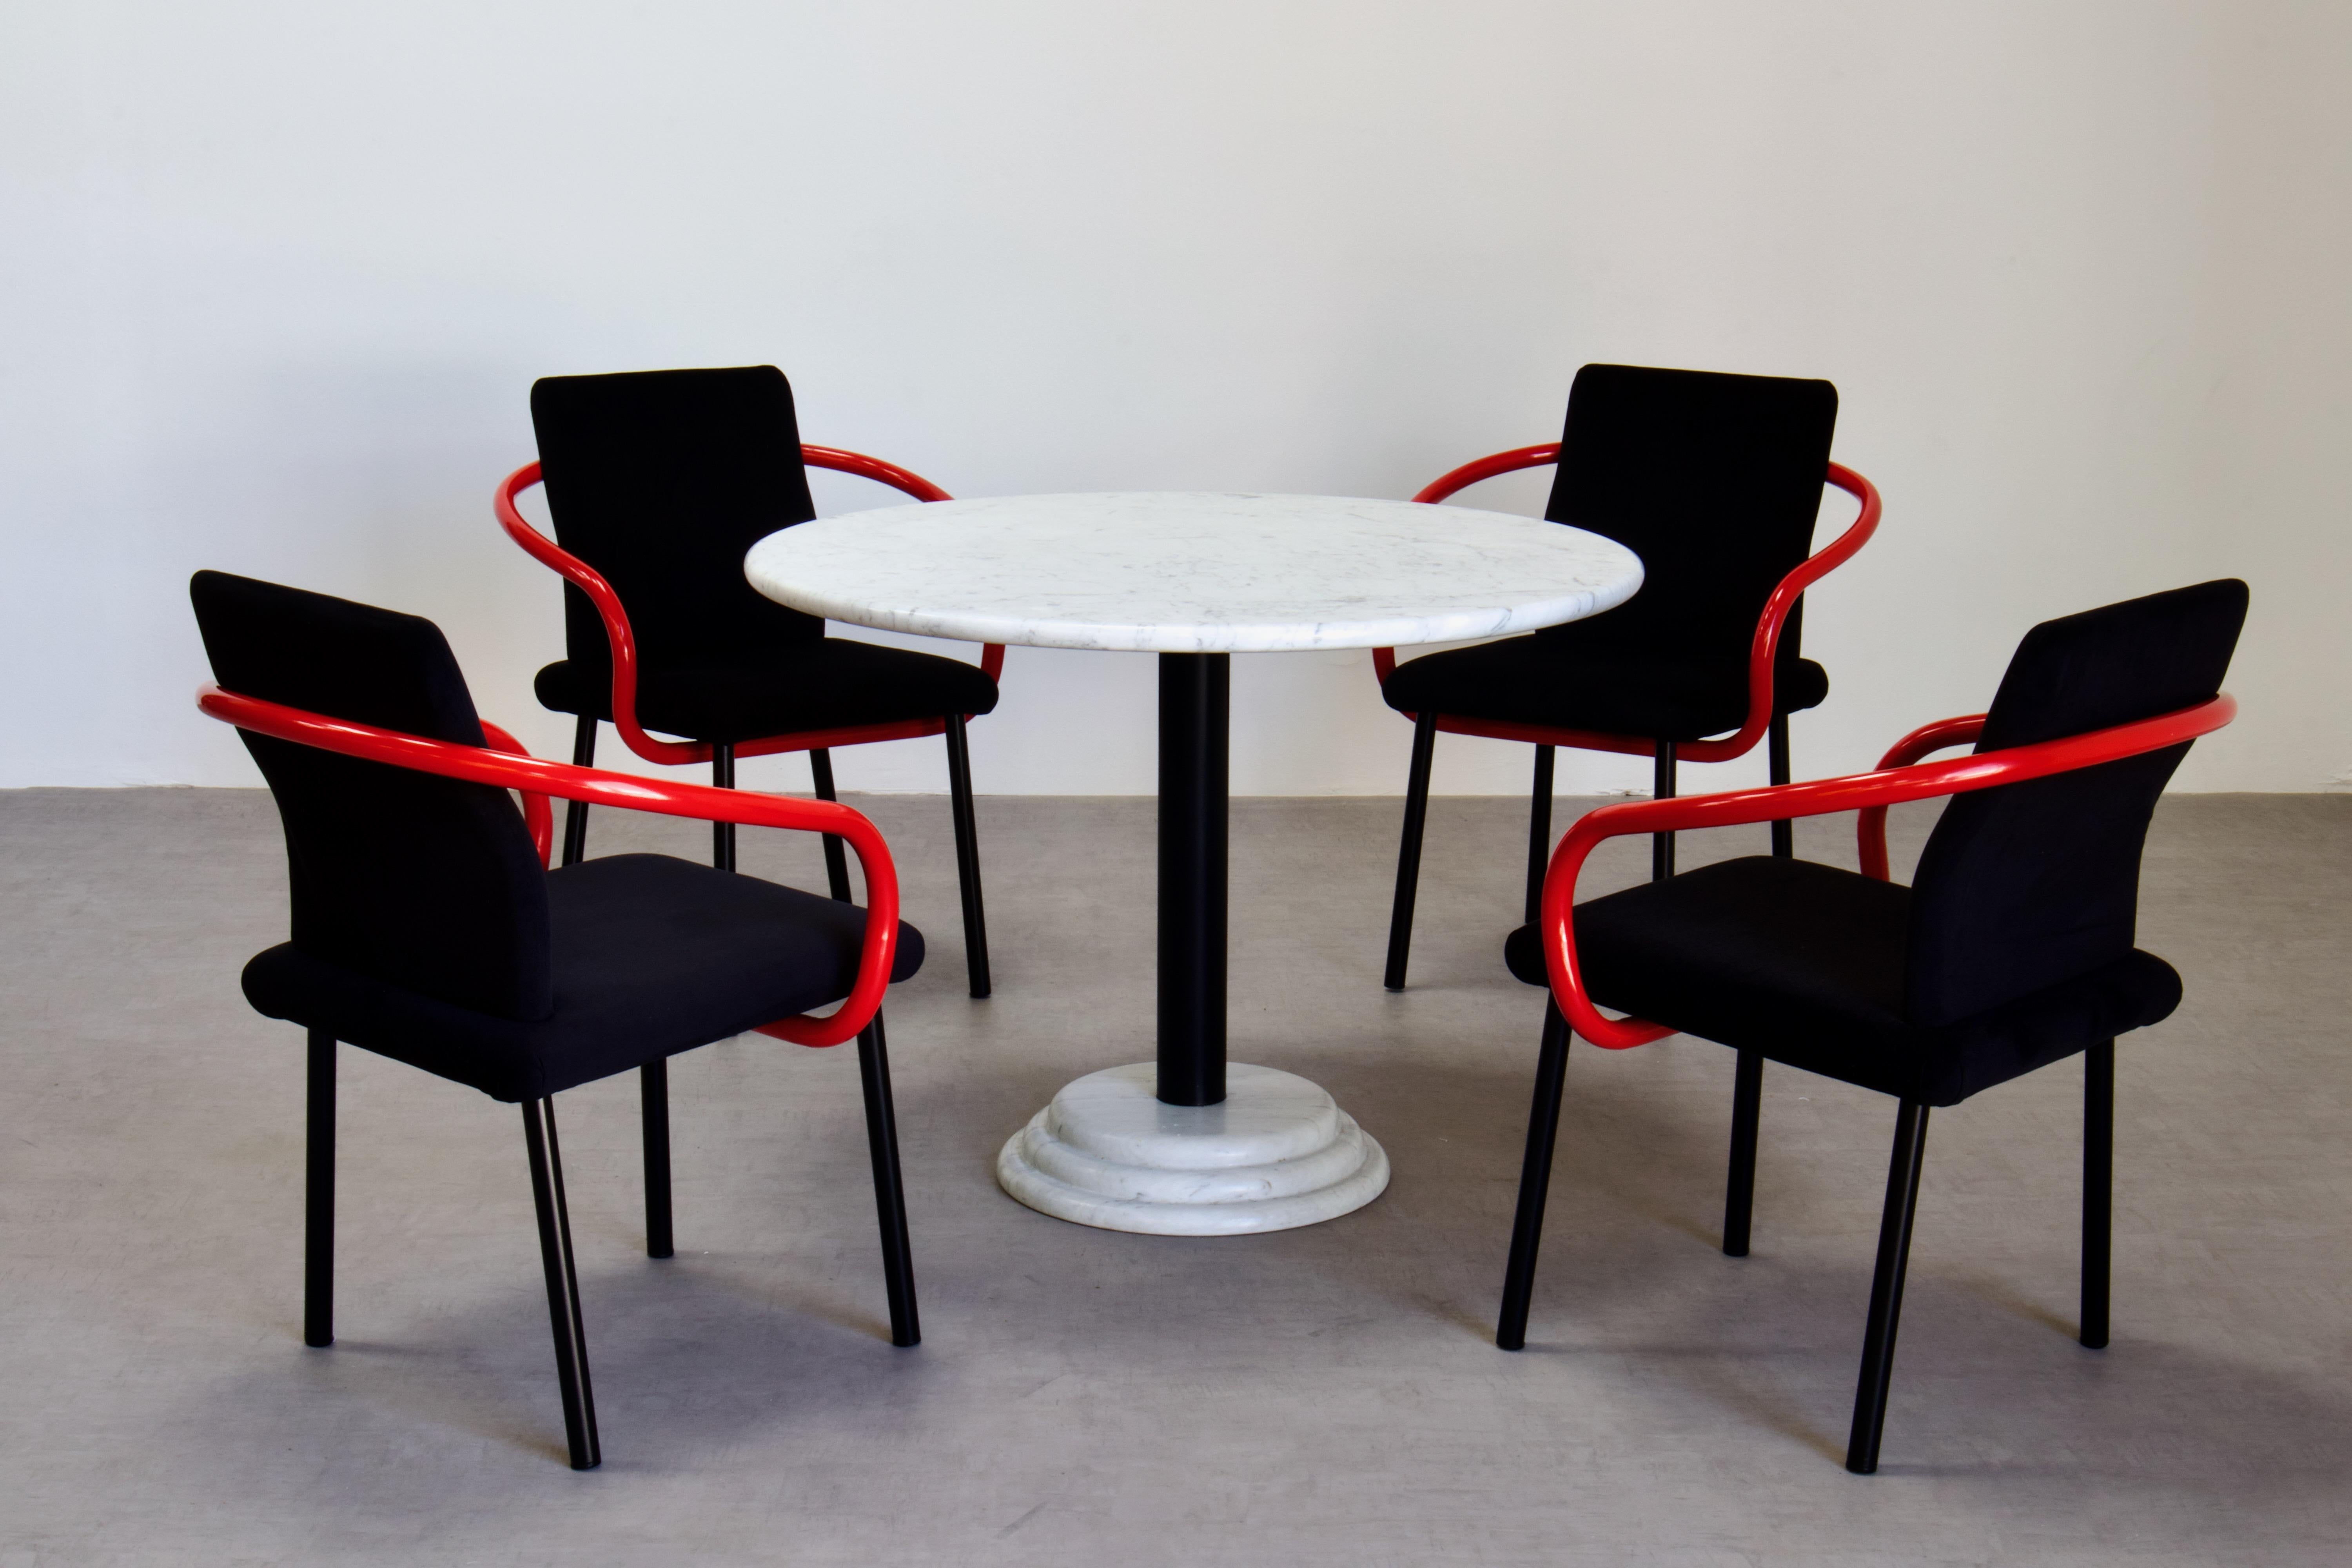 Post-Modern Ettore Sottsass Mandarin Dining Set in Carrara Marble, Red & Black, 1986 Italy For Sale